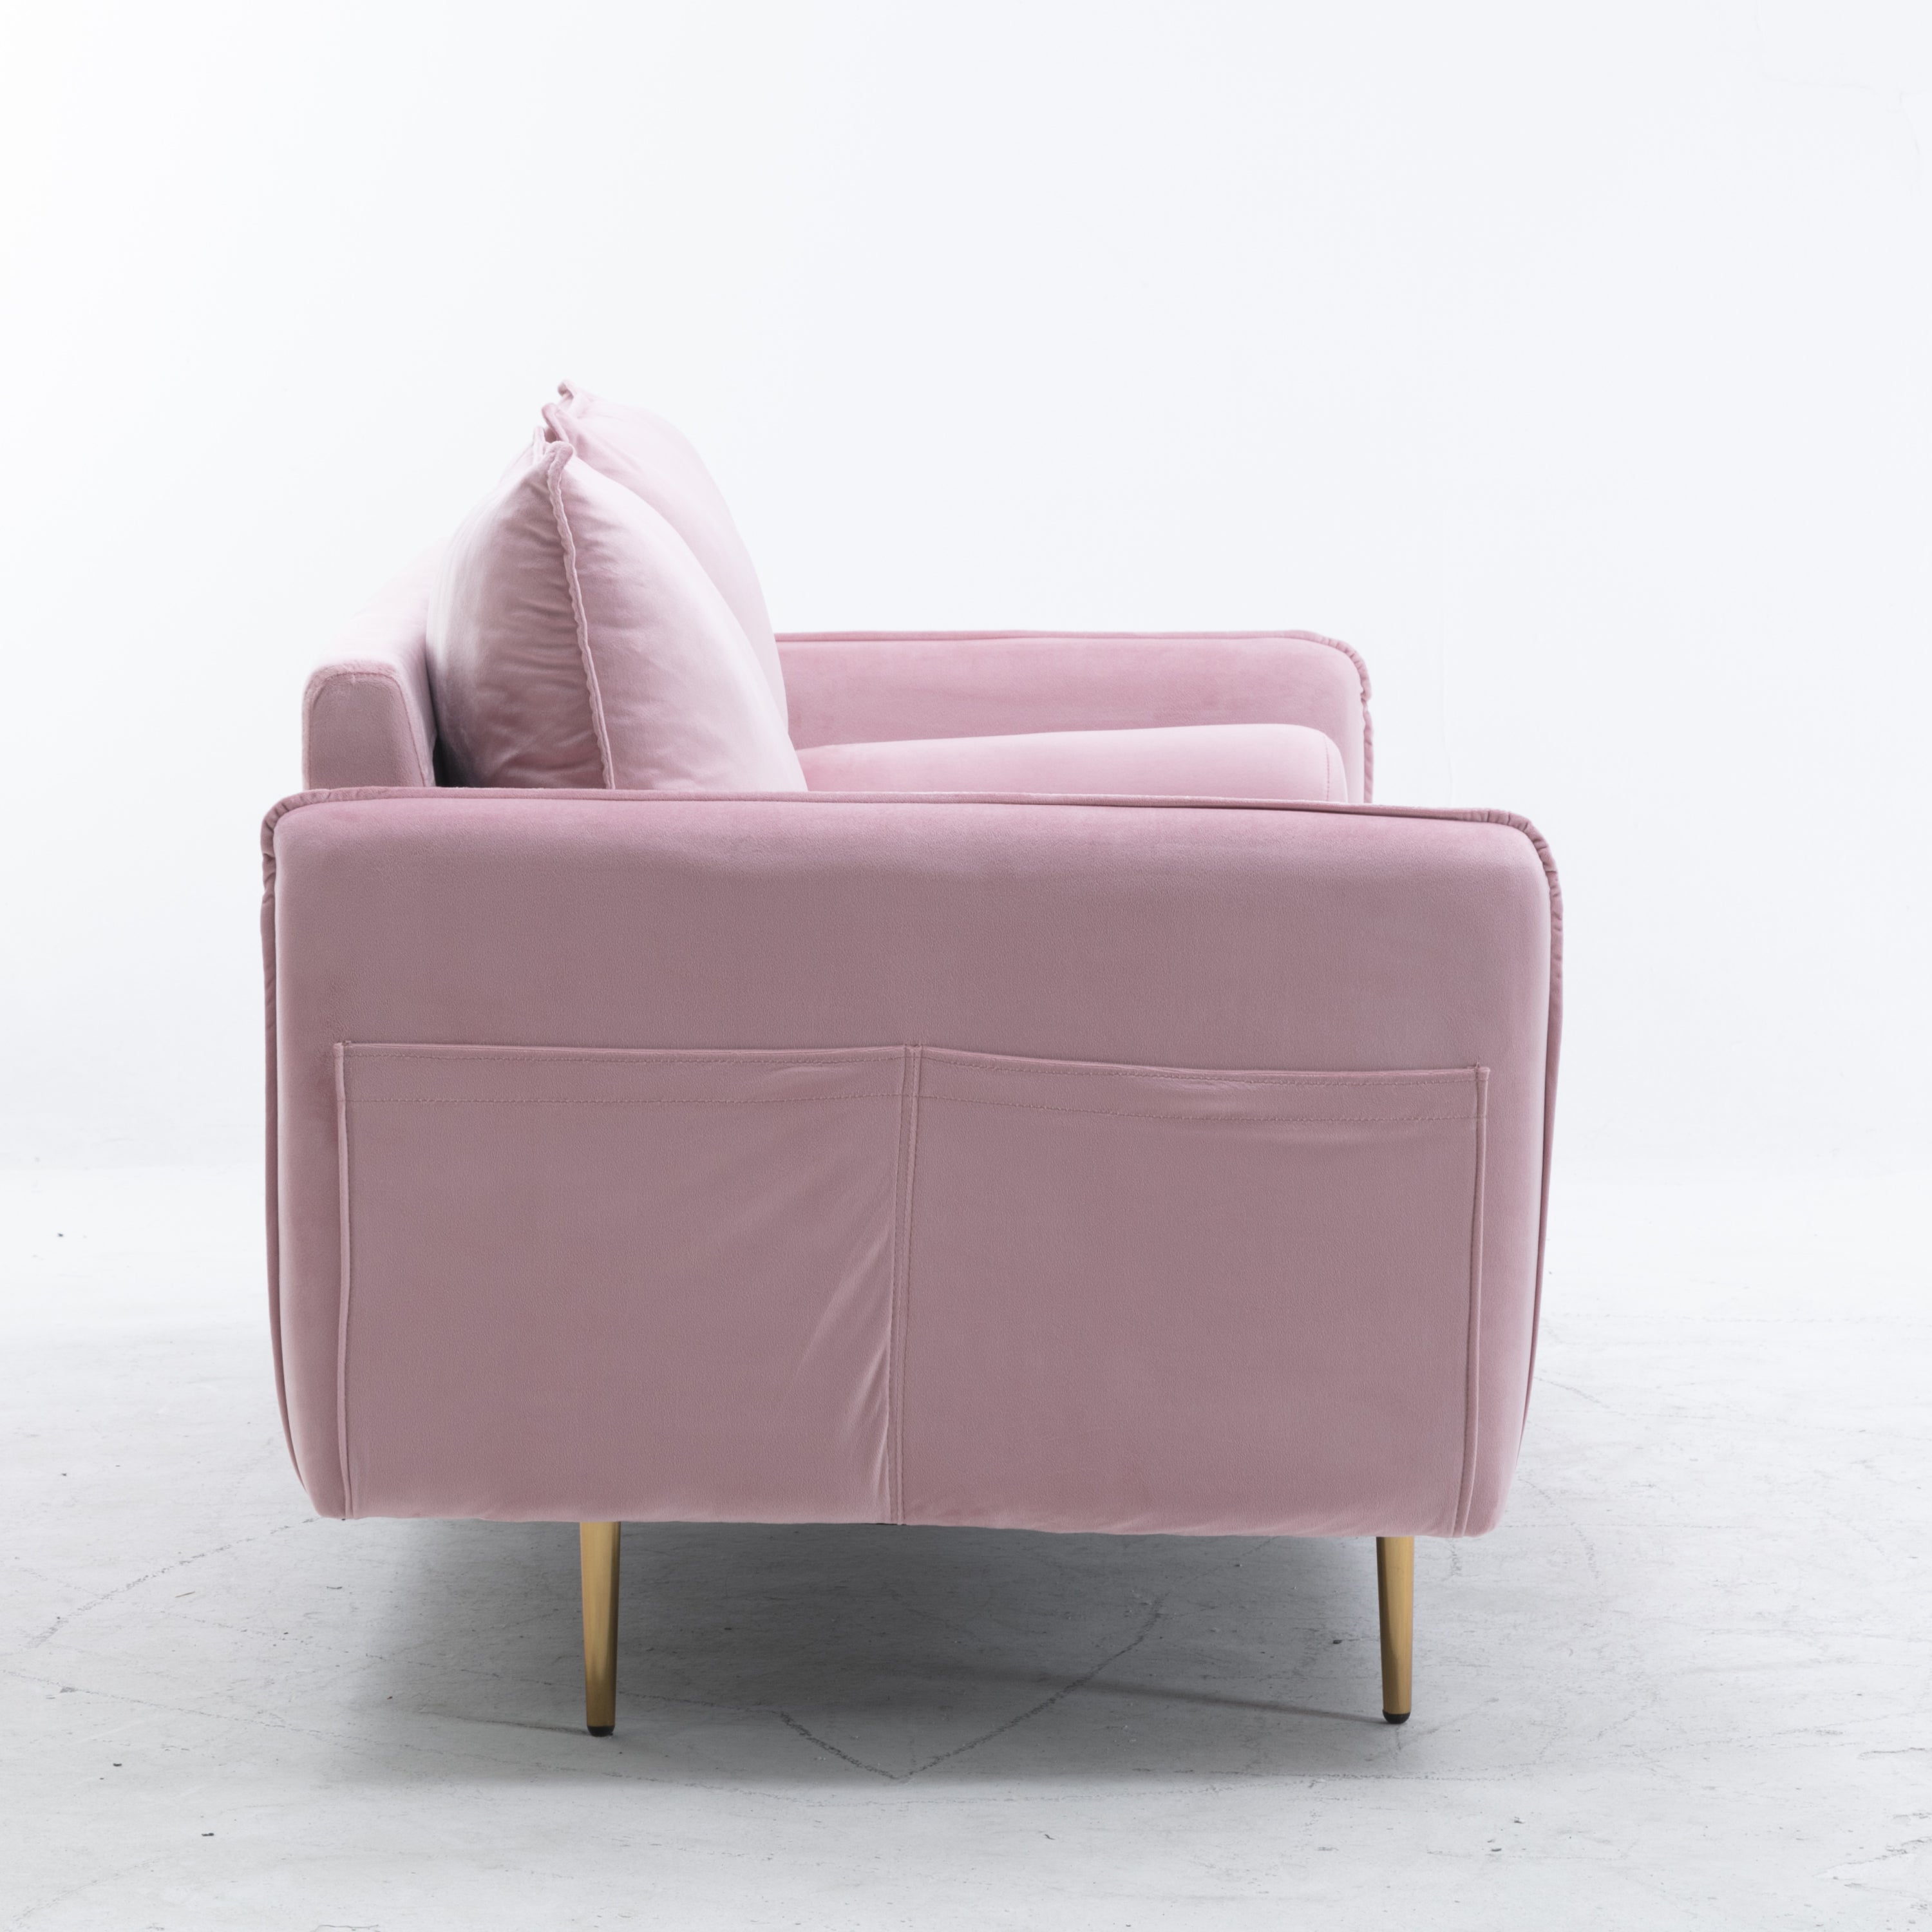 Modern Living Room Velvet Fabric Sofa Couch, Loveseat Sofa with Pocket - Pink